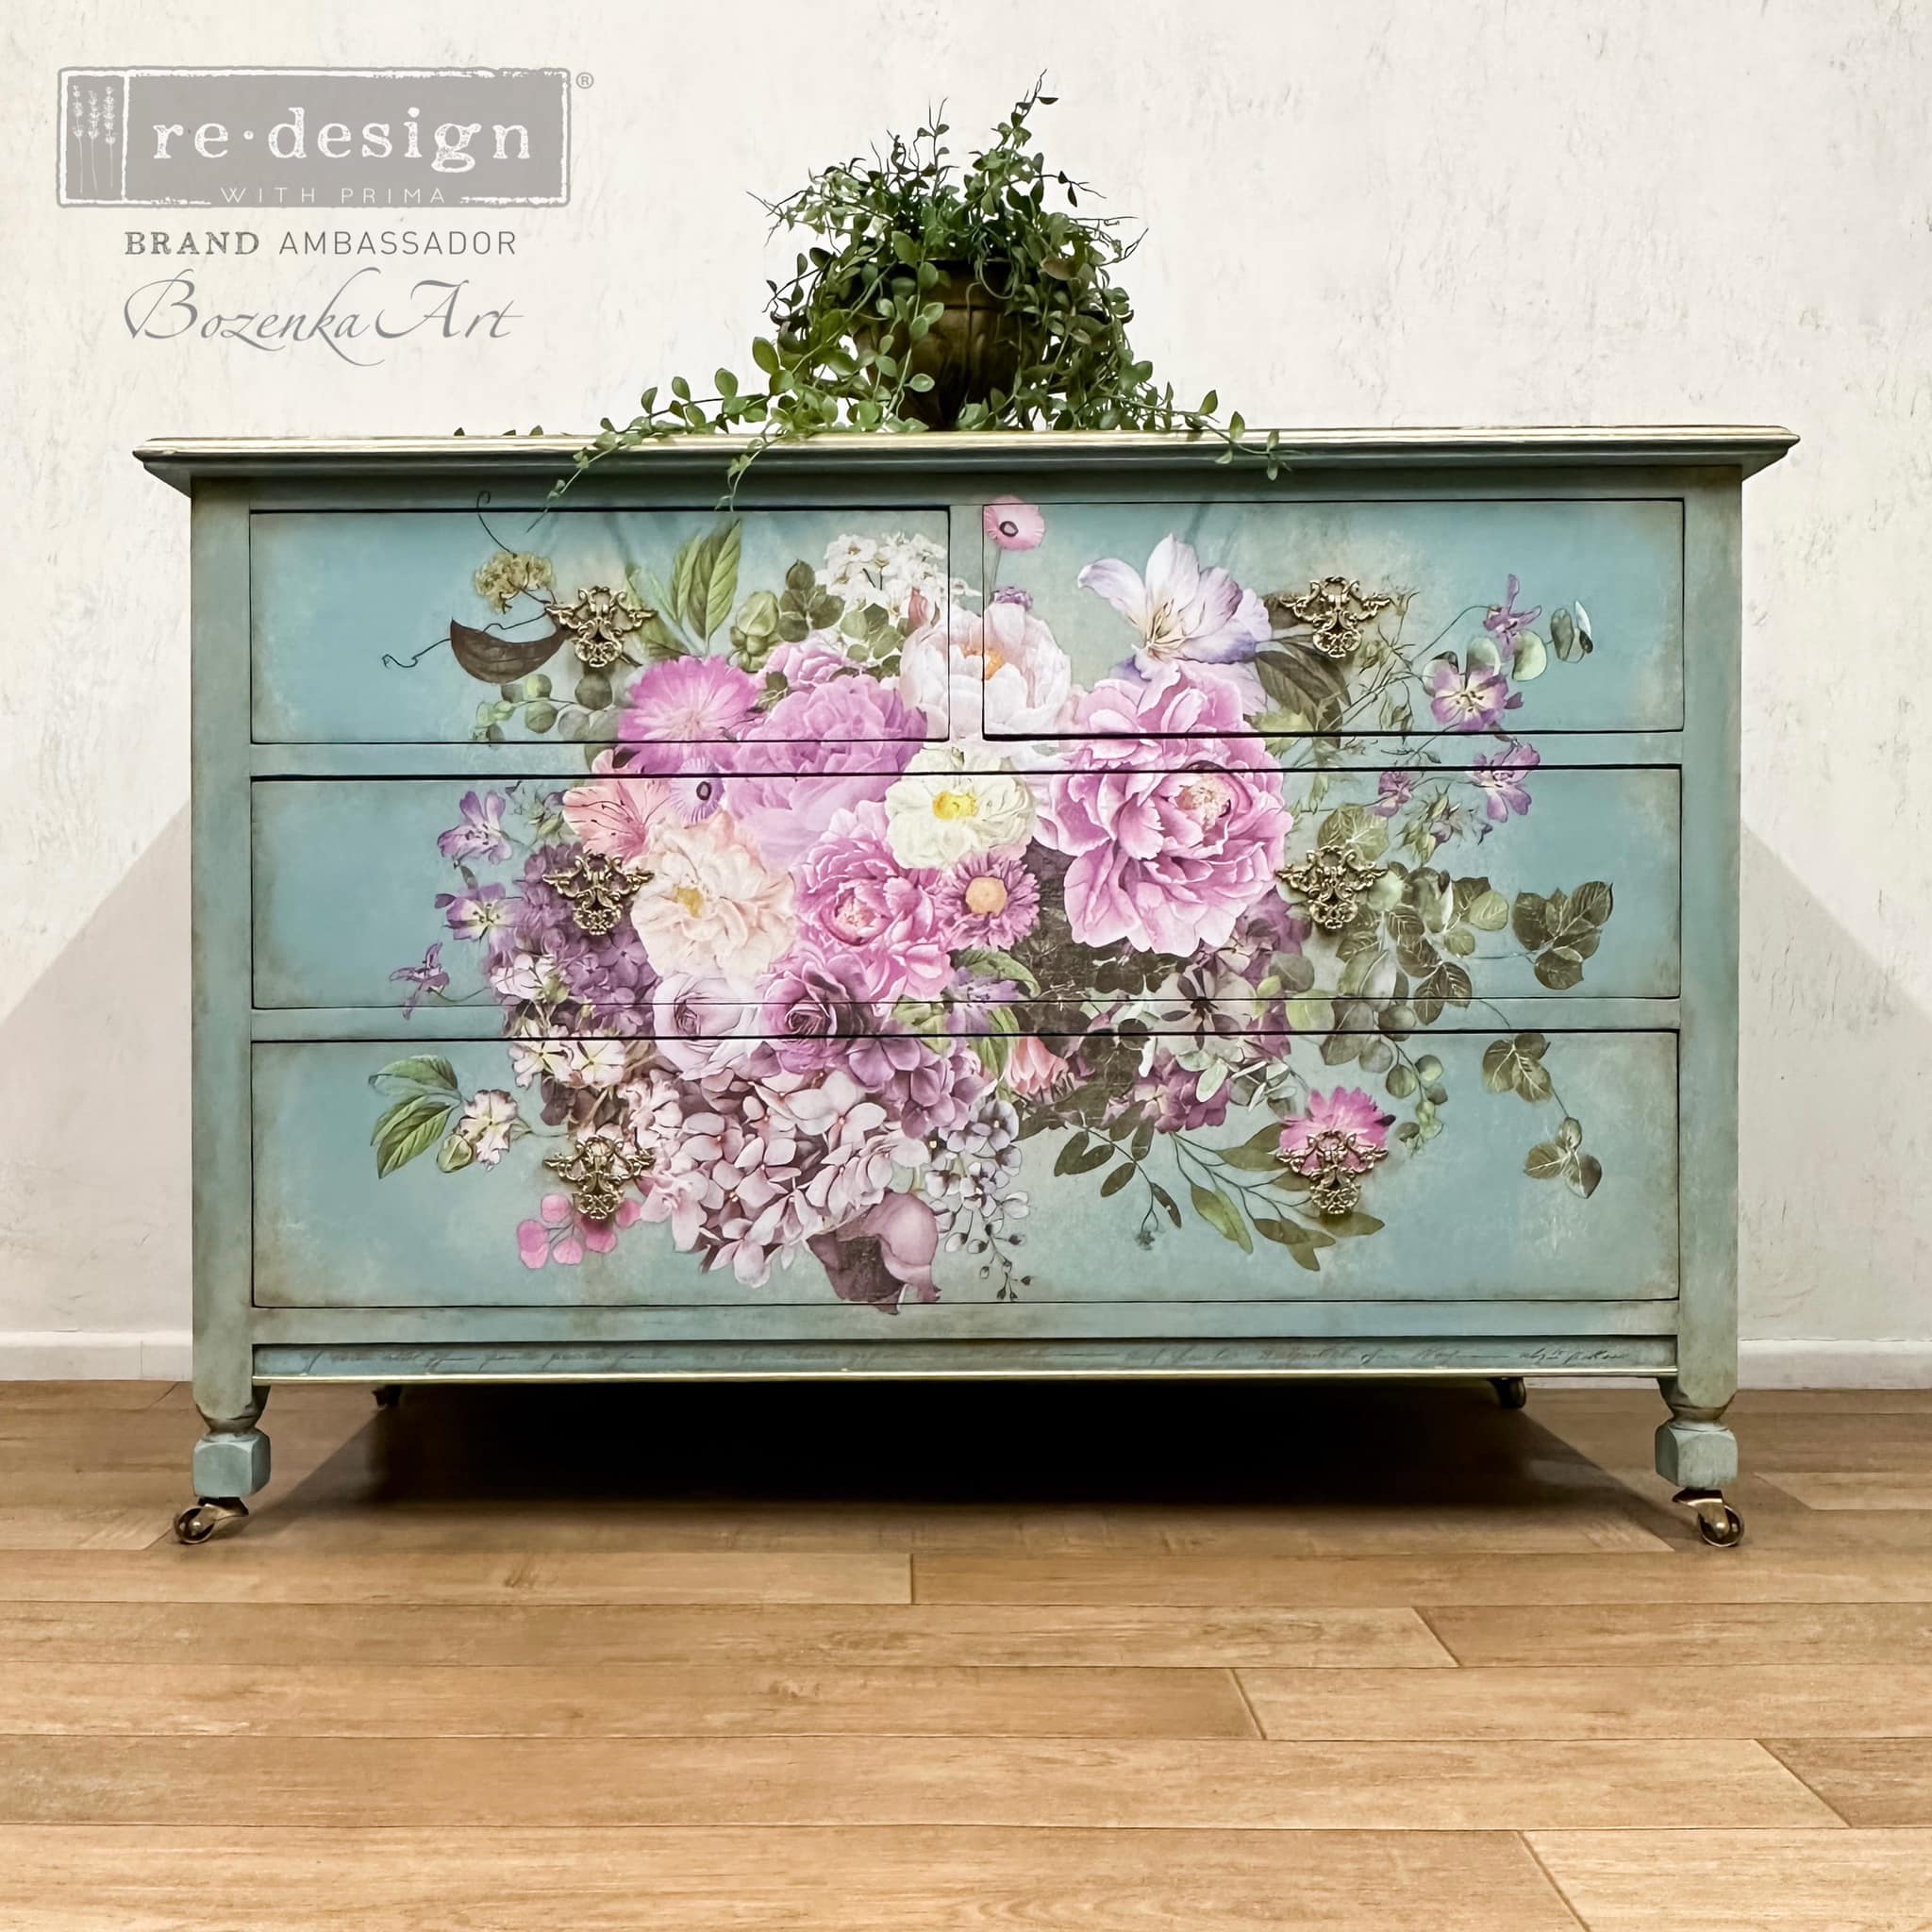 A vintage dresser refurbished by Bozenka Art is painted light teal blue and features ReDesign with Prima's Kacha Morning Purple transfer in the center of its drawers.